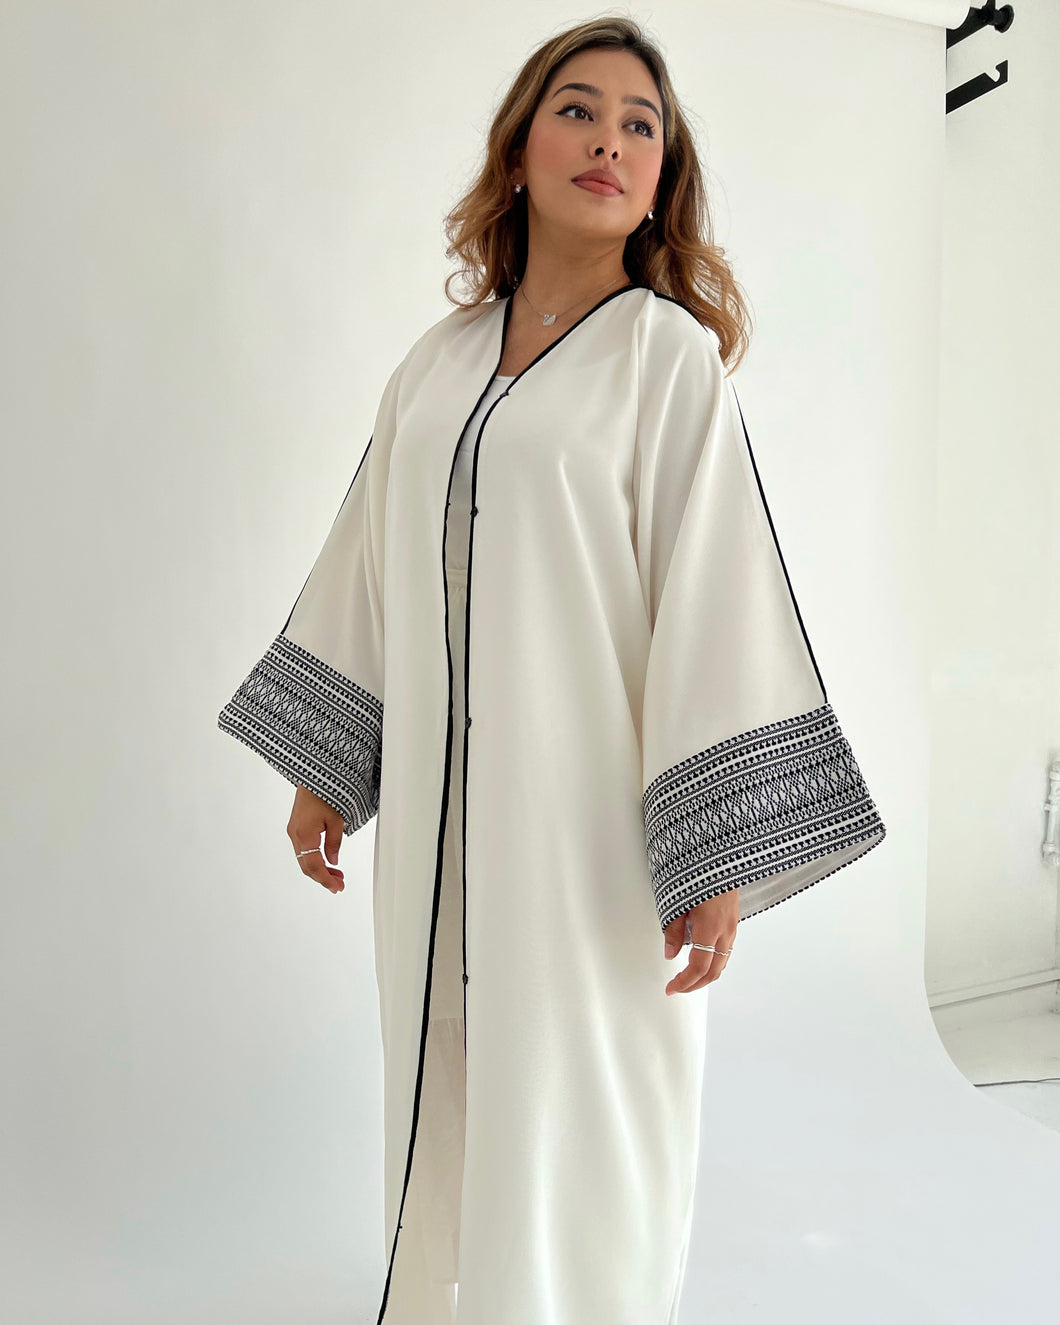 Hessian Linen Abaya with Embroidered Sleeves - White OR Black